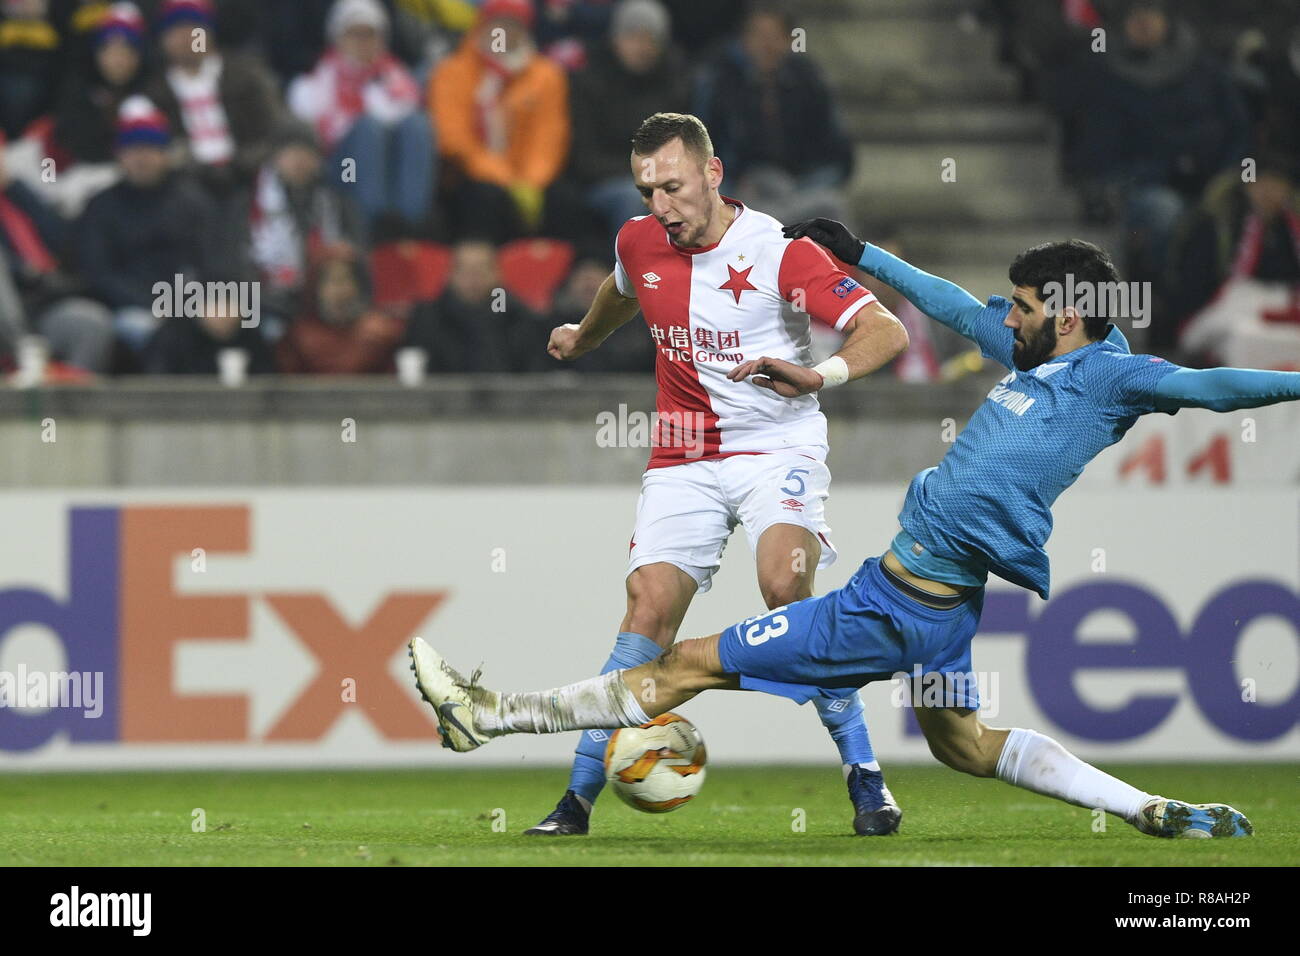 Prague, Czech Republic. 13th Dec, 2018. L-R Vladimir Coufal (Slavia) and Luis Neto (Zenit) in action during the UEFA Europa League, Group Stage, Group C, match between SK Slavia Praha and FC Zenit Saint Petersburg, in Prague, Czech Republic, on December 13, 2018. Credit: Michal Kamaryt/CTK Photo/Alamy Live News Stock Photo